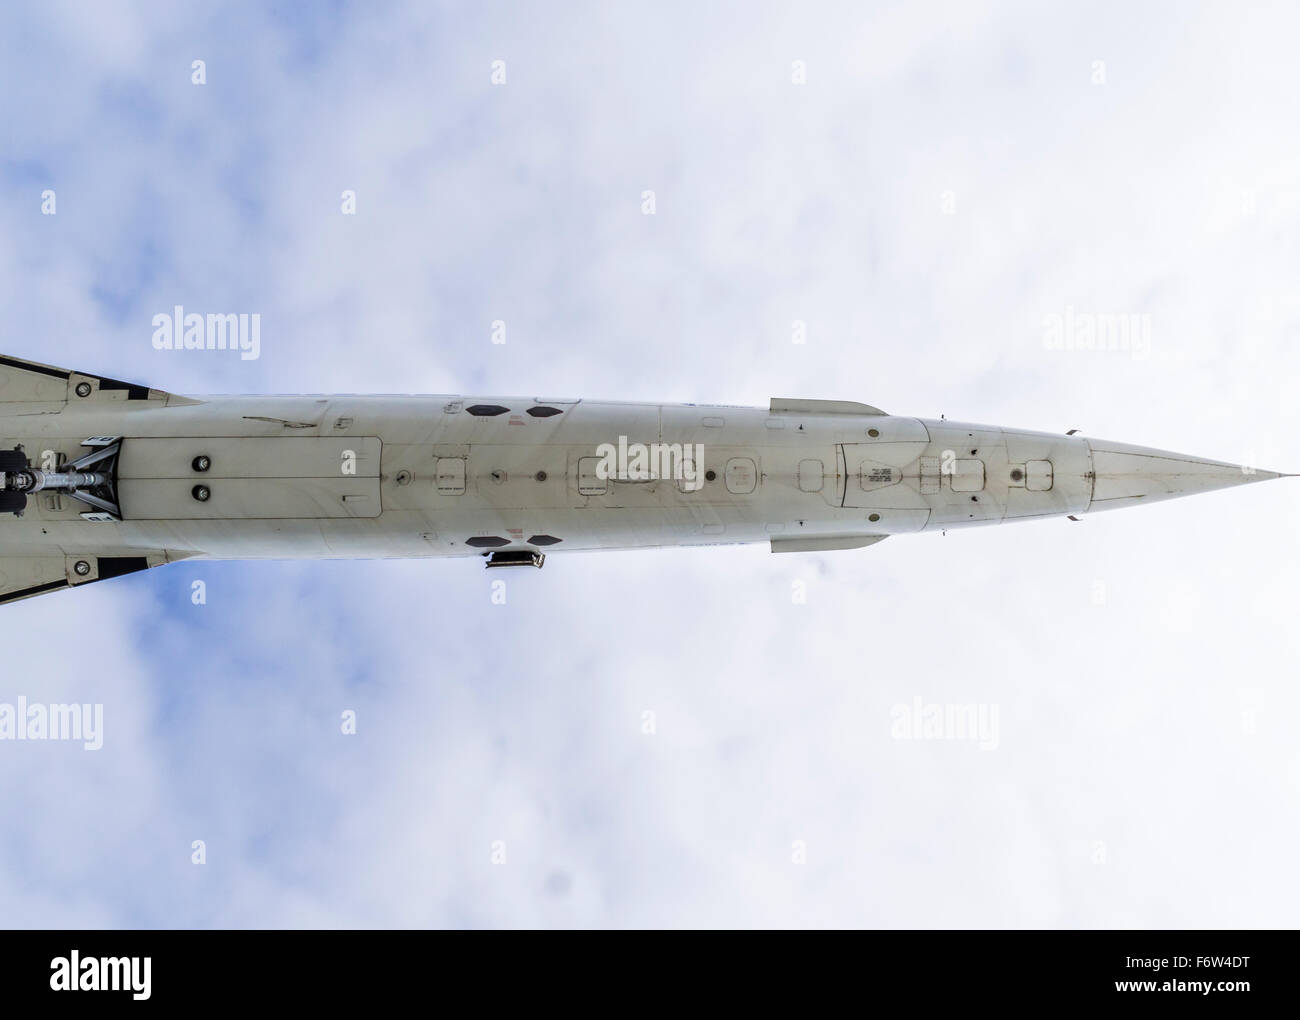 View from below at the nose of a discarded Concorde supersonic passenger aircraft. Stock Photo